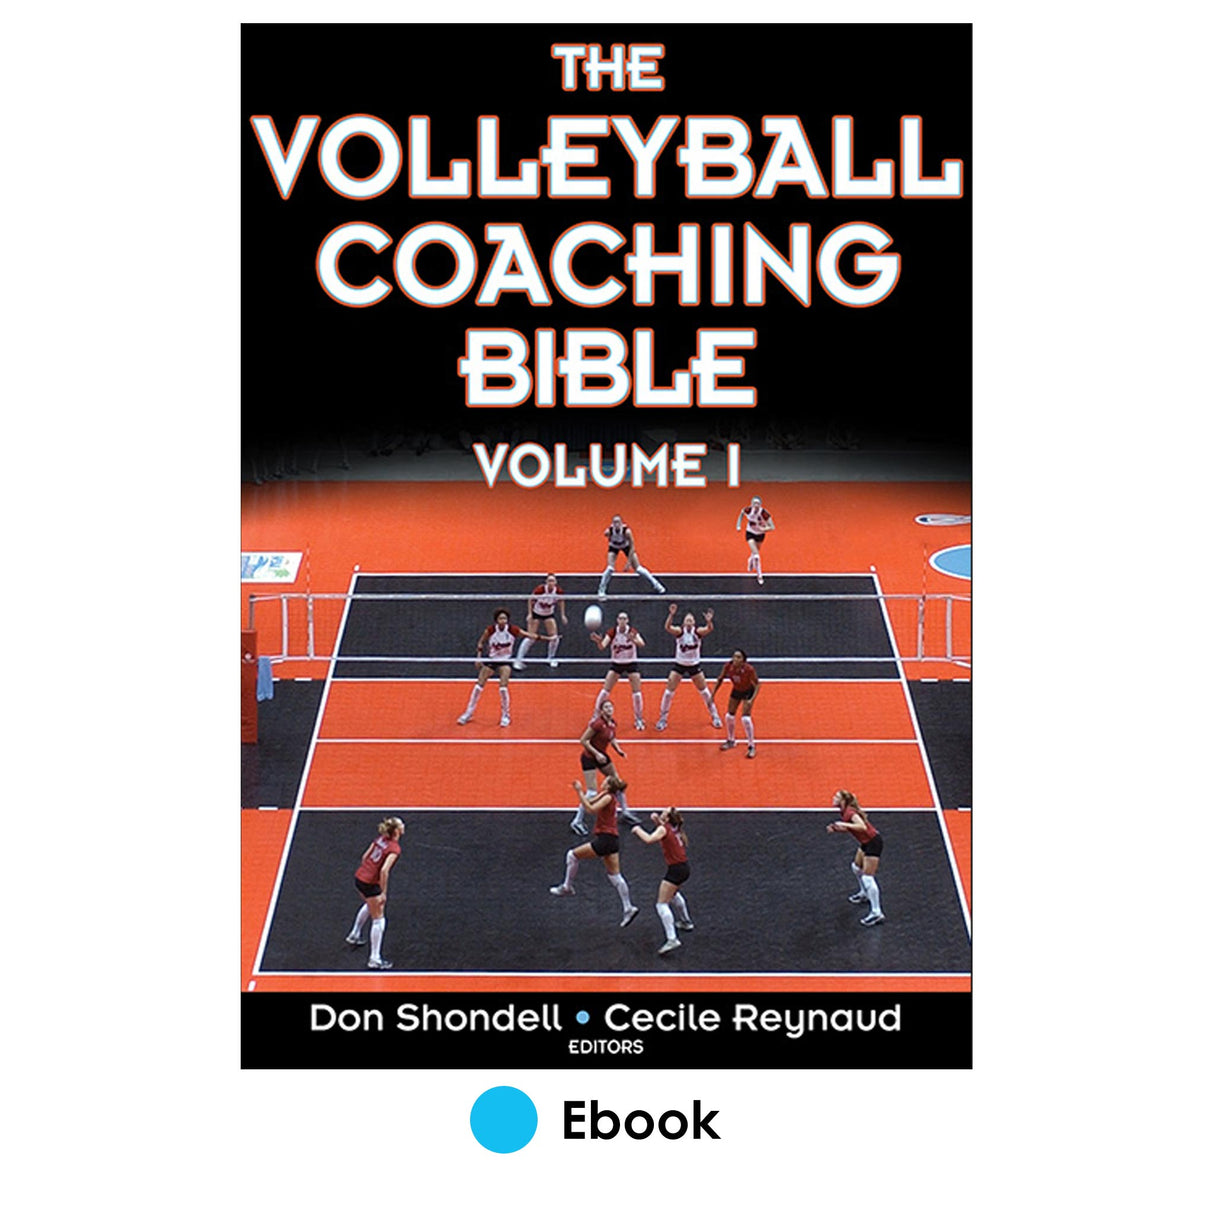 Volleyball Coaching Bible PDF, The